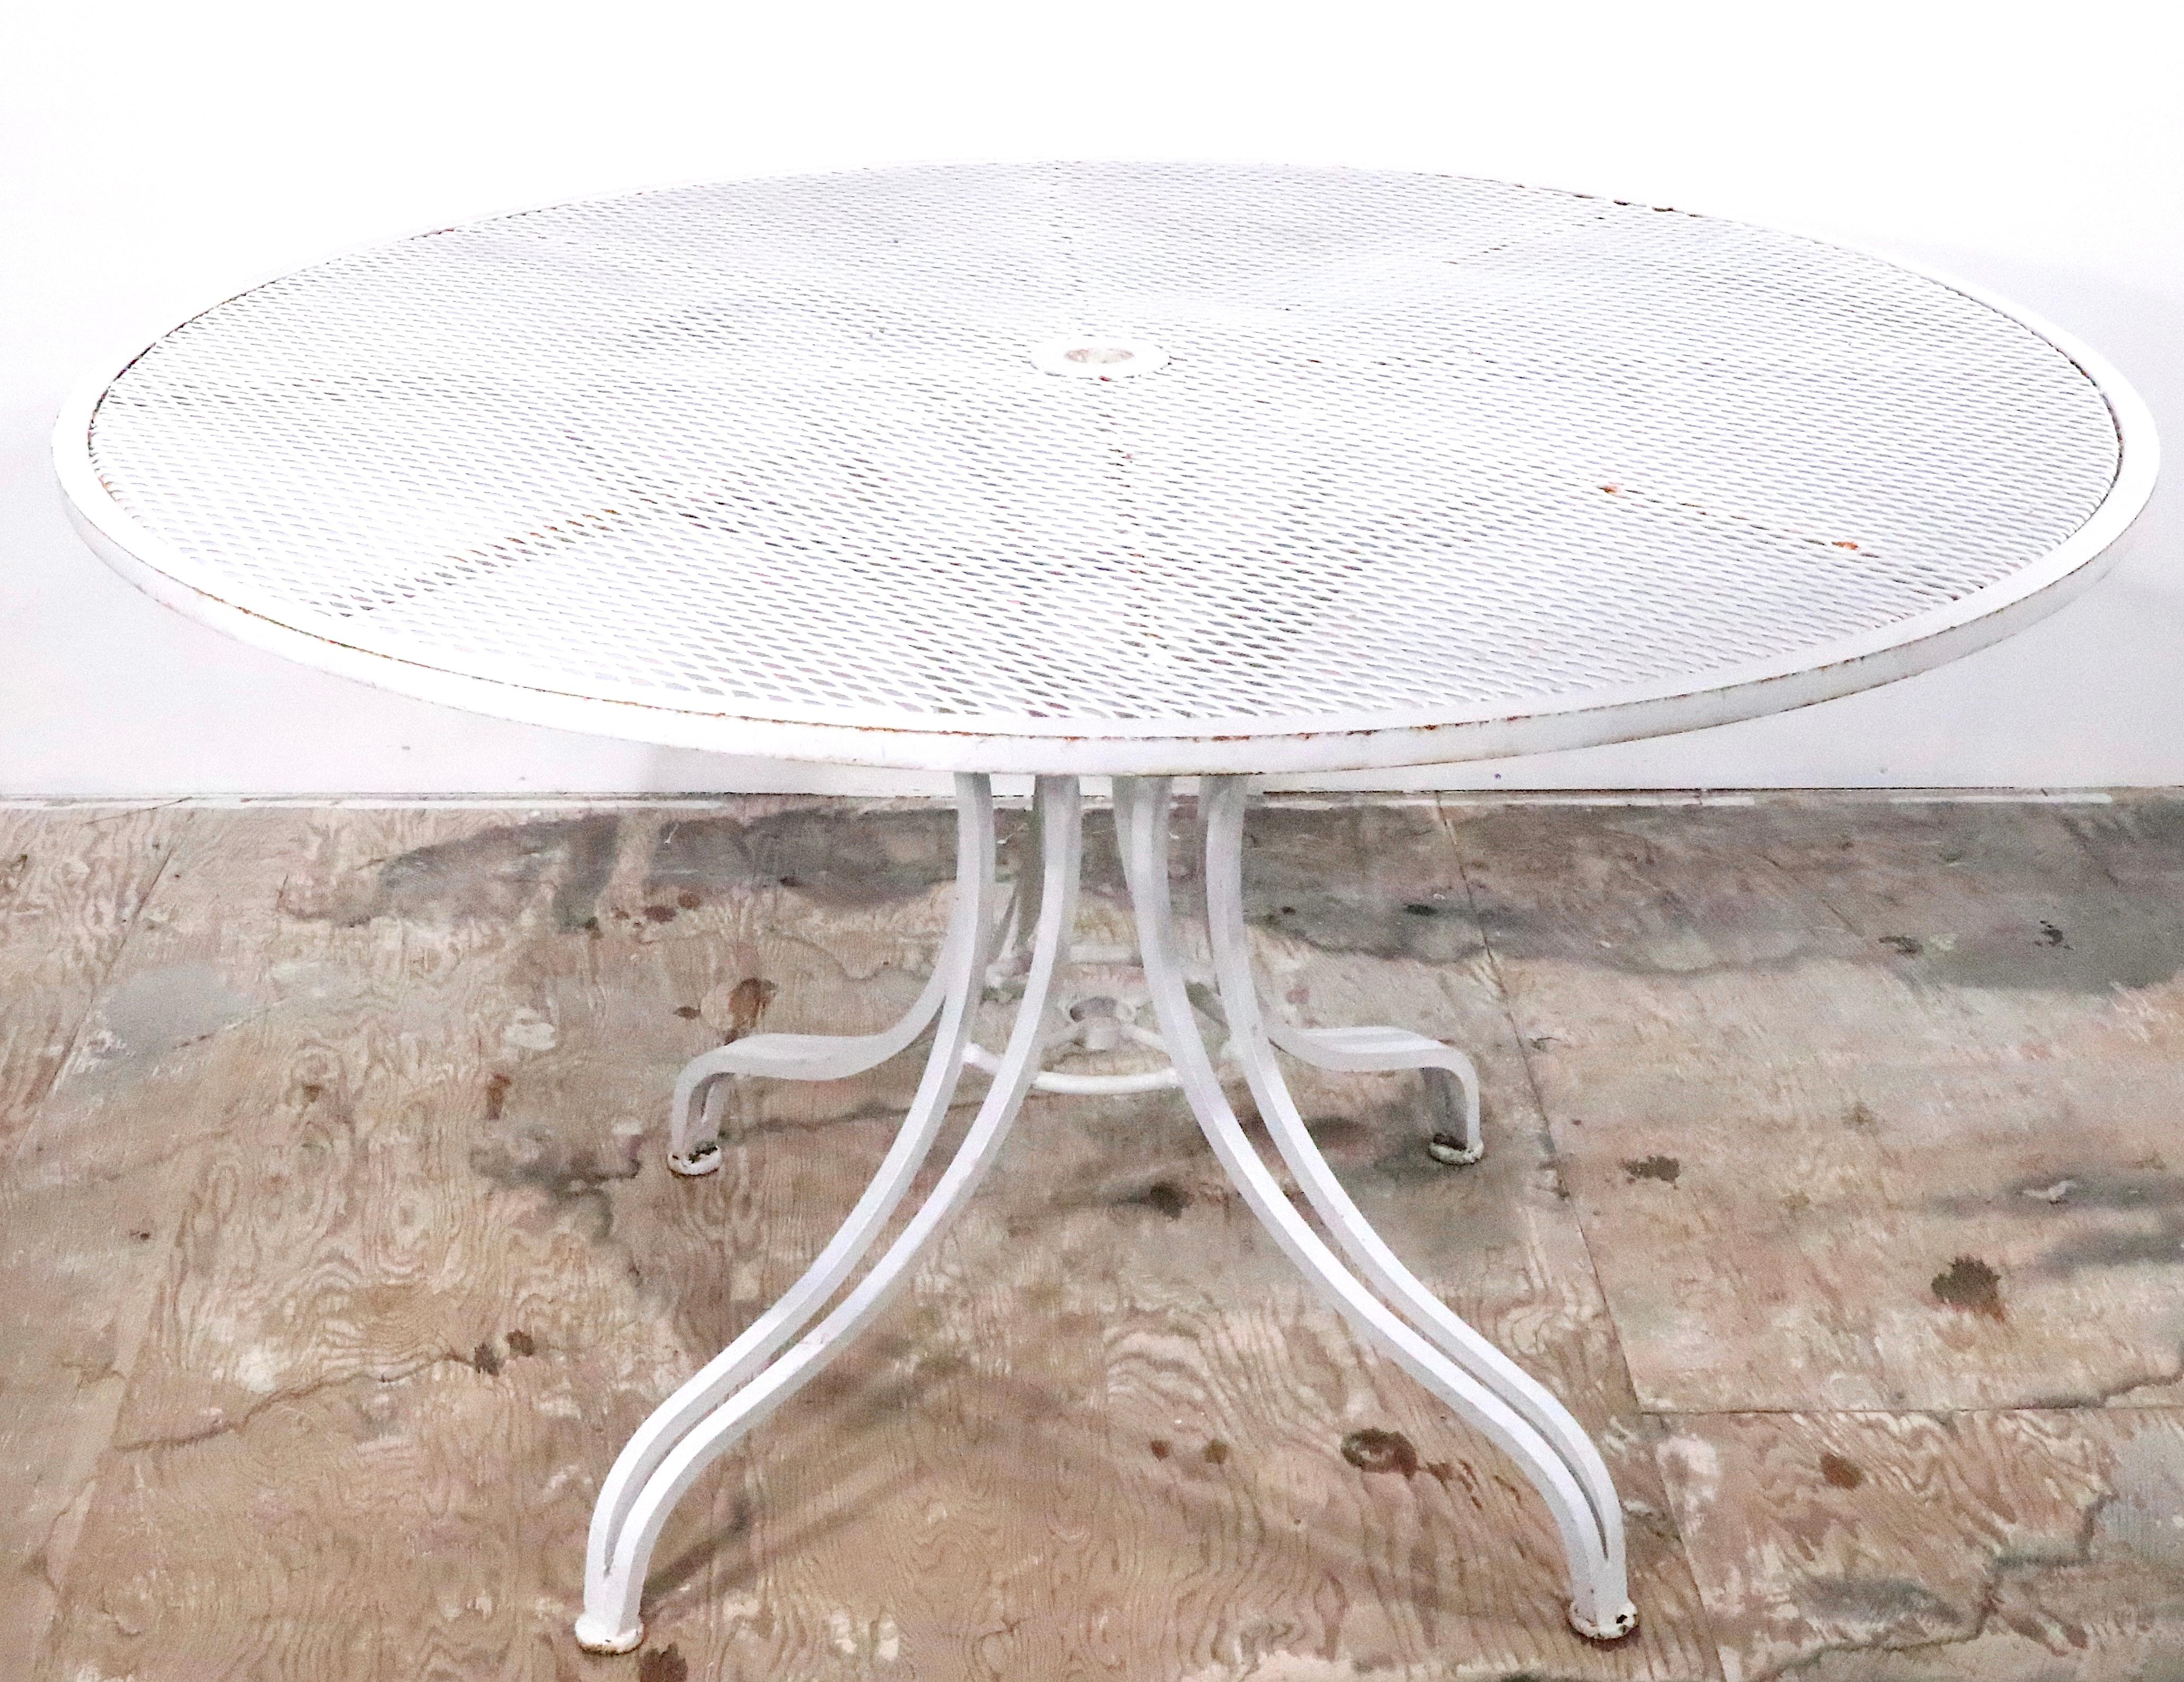 Exceptional vintage garden, patio, poolside table of wrought iron and metal mesh. The table features a stylized architectural pedestal base of heavy gauge wrought iron, which supports the circular metal mesh top. This example is in very good